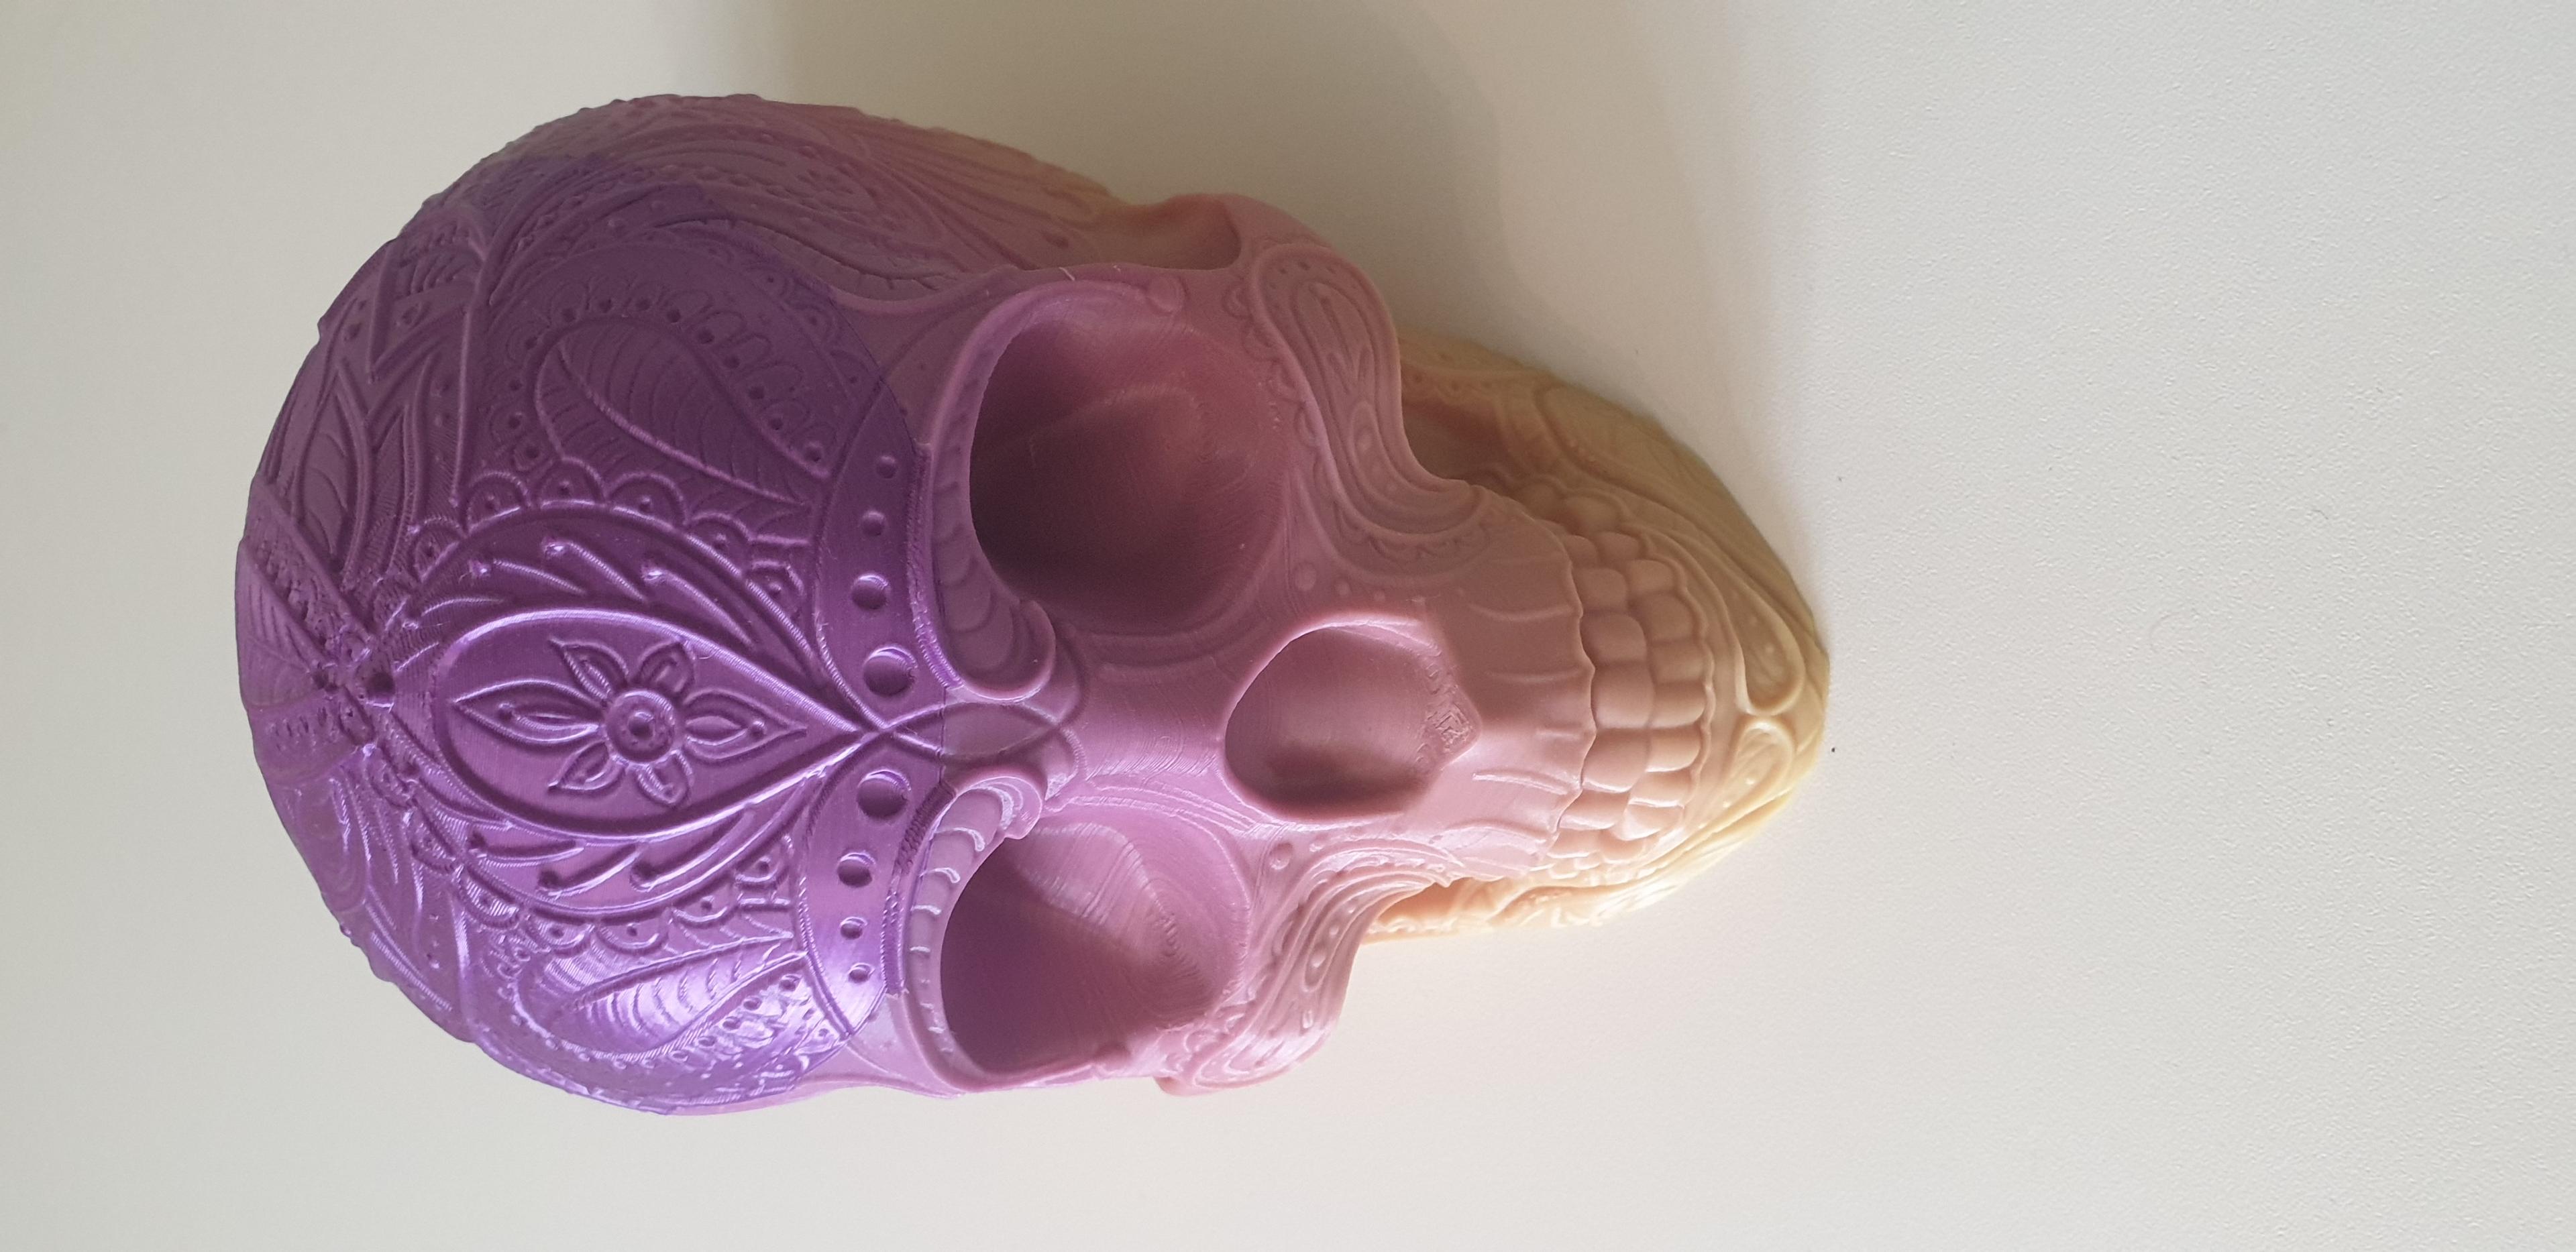 Paisley Skull  - Paisley Skull
0.16 Layer Height
15% infill (forgot to change to 5% before slicing) so had to change out of filament through print.
Bottom 2/3rds of print is in Xvico rainbow PLA, final 3rd in Eryone Silk Purple
Supports under cheek bones. - 3d model